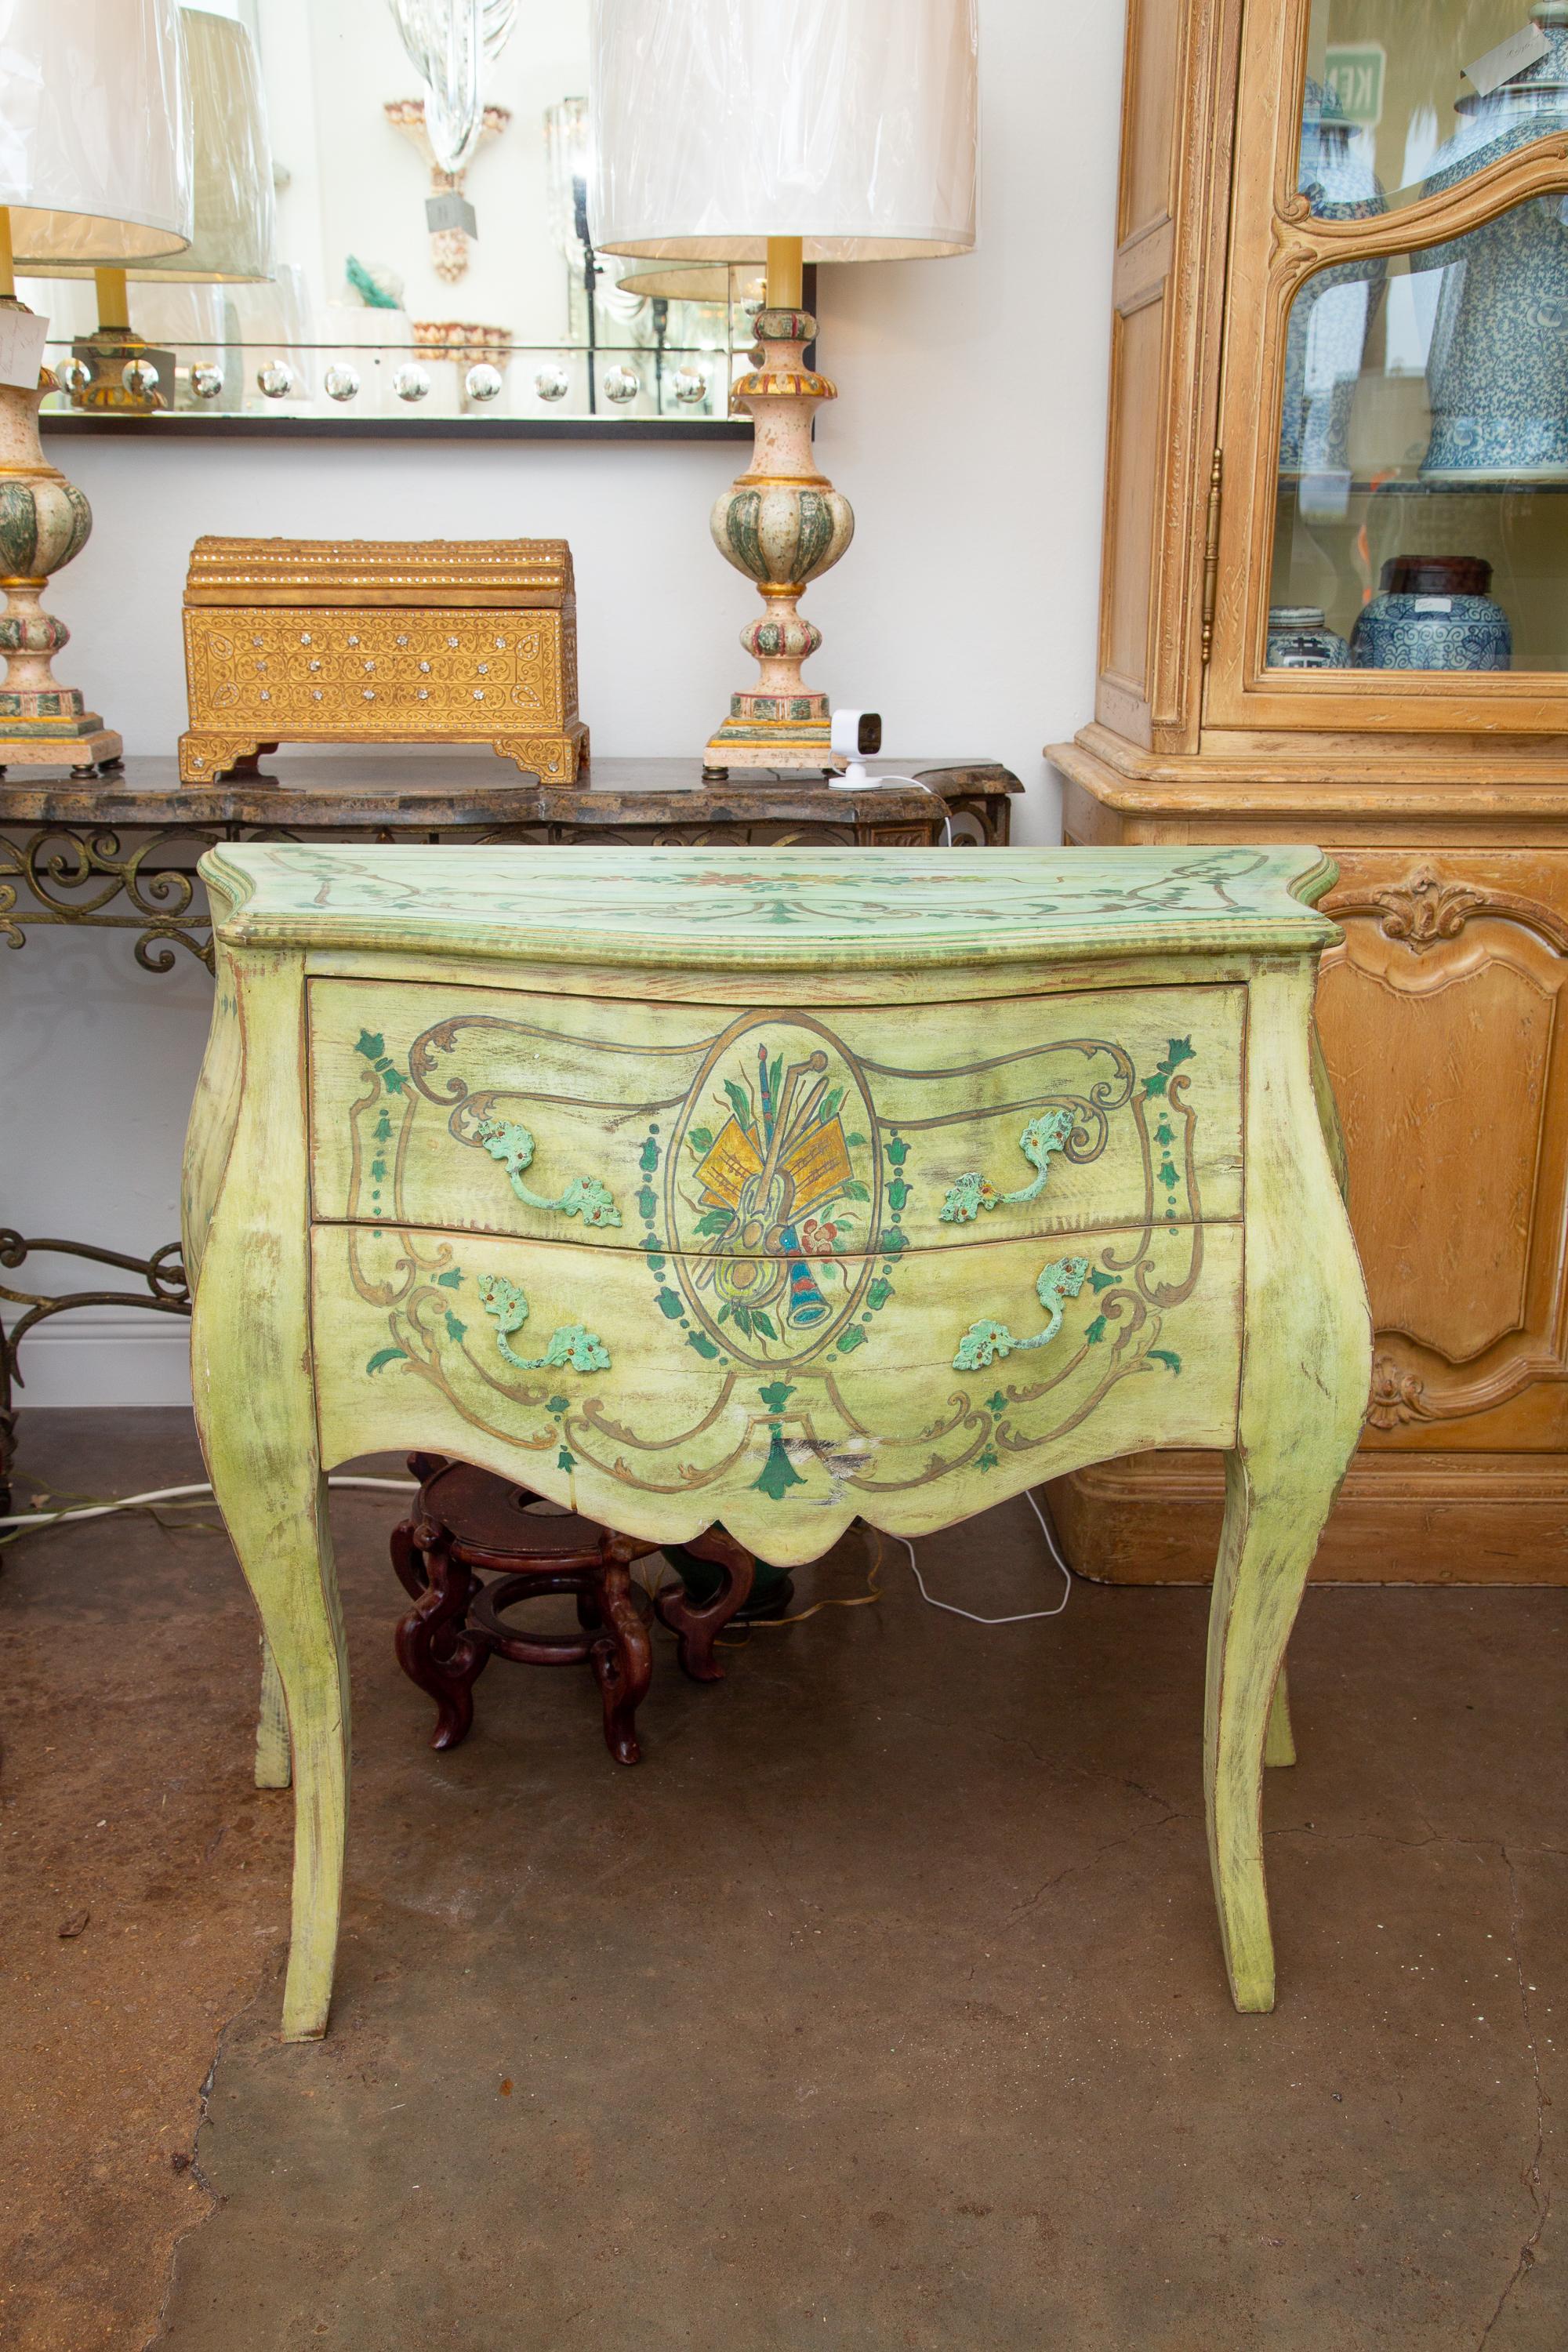 This is a very decorative pair of Italian Rococo style commodes, painted light green over all, serving as background for a central figure depicting musical instruments, supported by cabriole legs, 20th century.